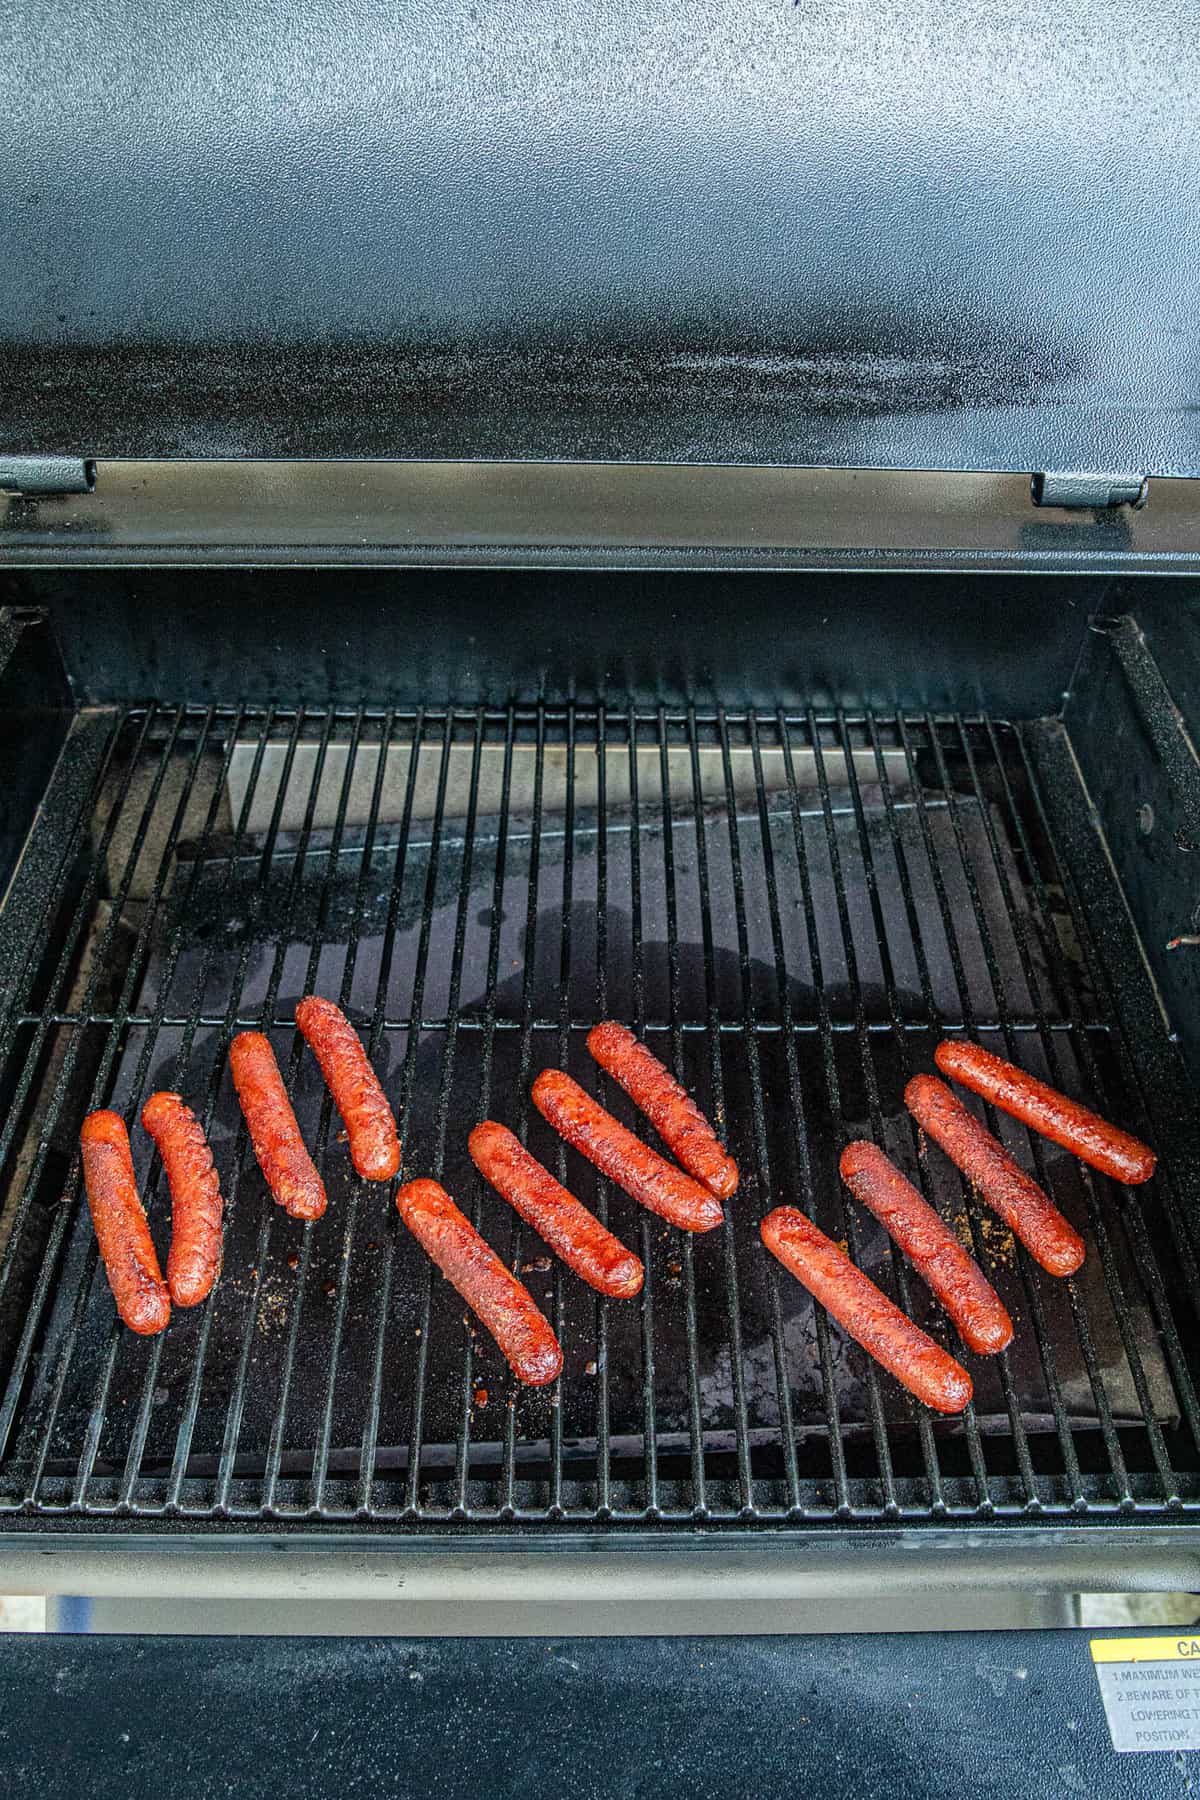 Flipping hot dogs on Traeger grill for Smoked Hot Dogs recipe